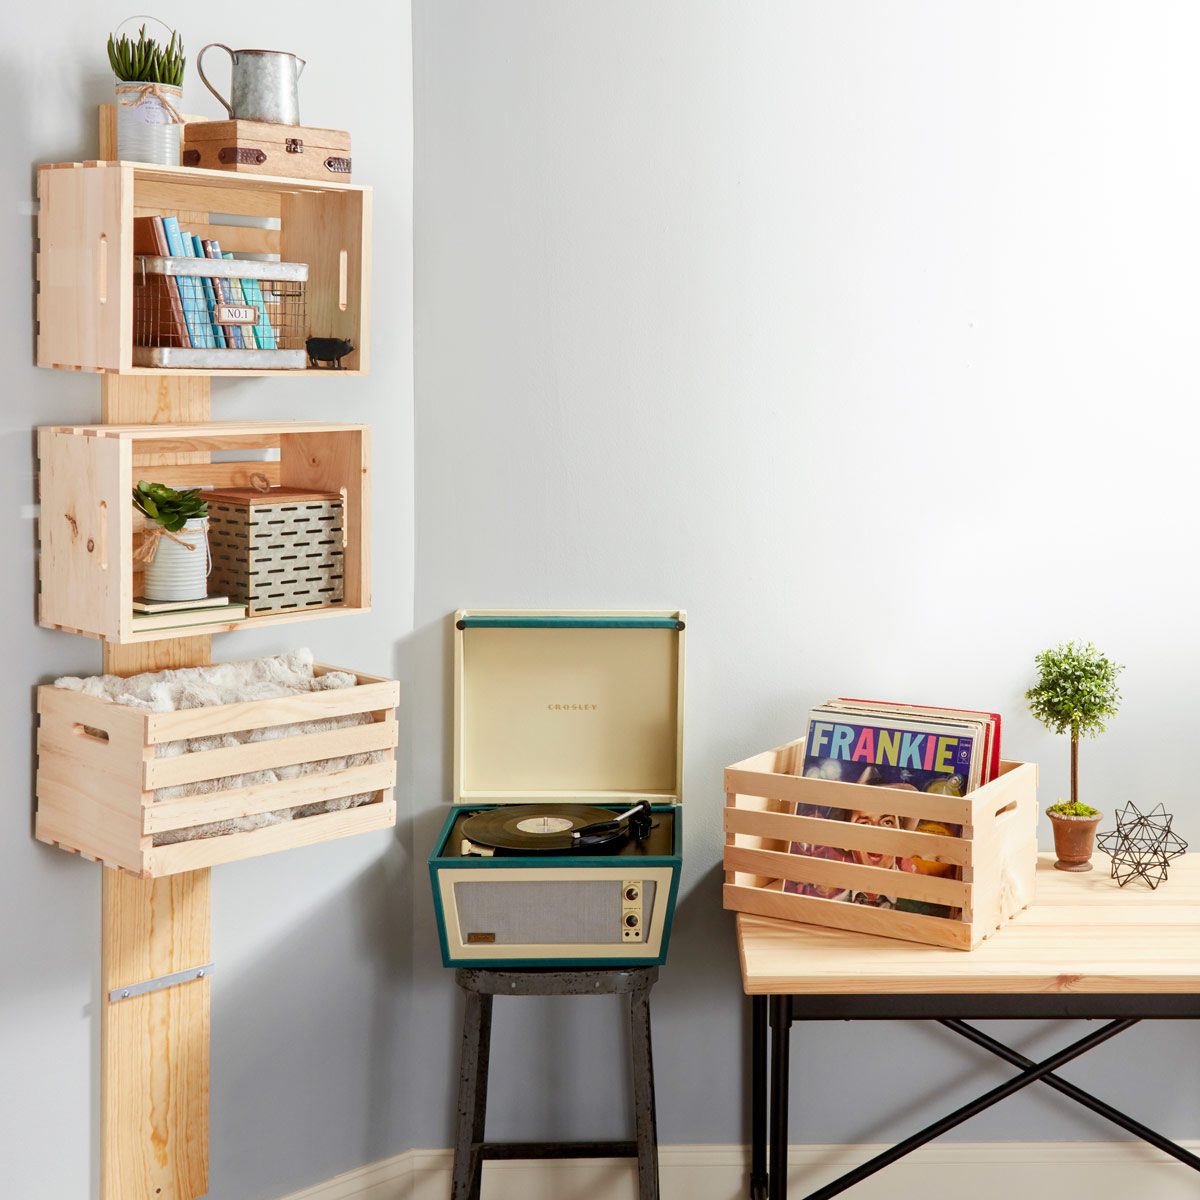 19 Ways to Decorate With Wooden Crates